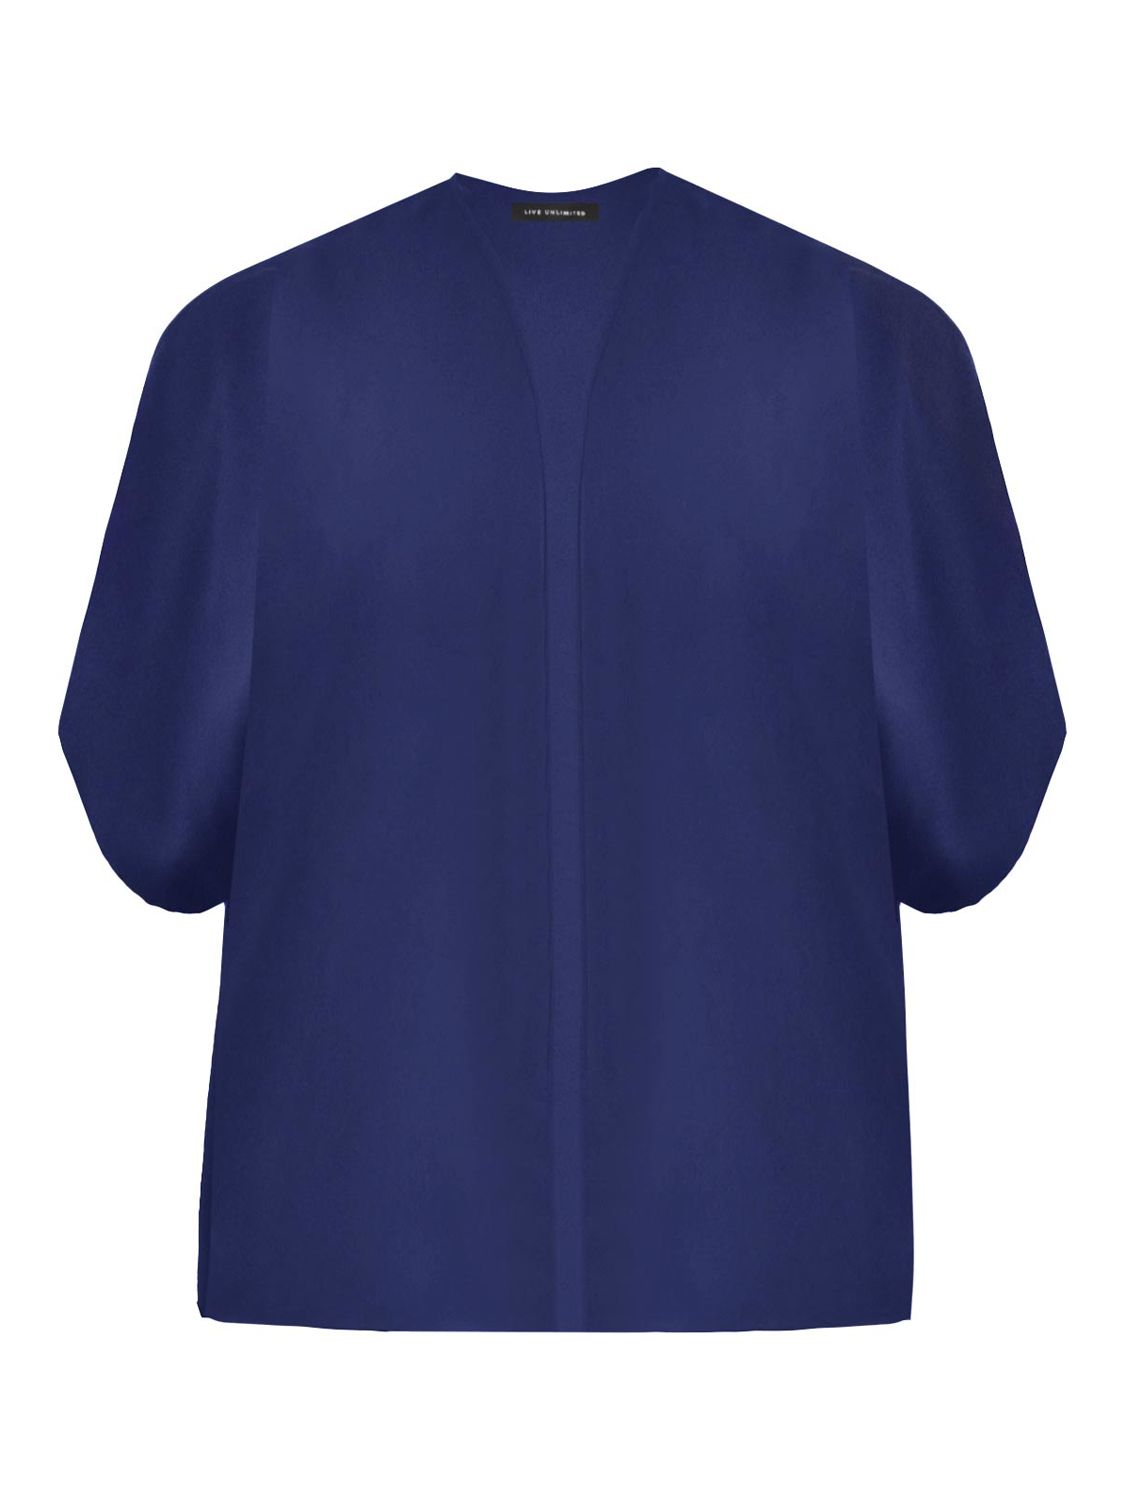 Buy Live Unlimited Curve Batwing Cover Up Online at johnlewis.com